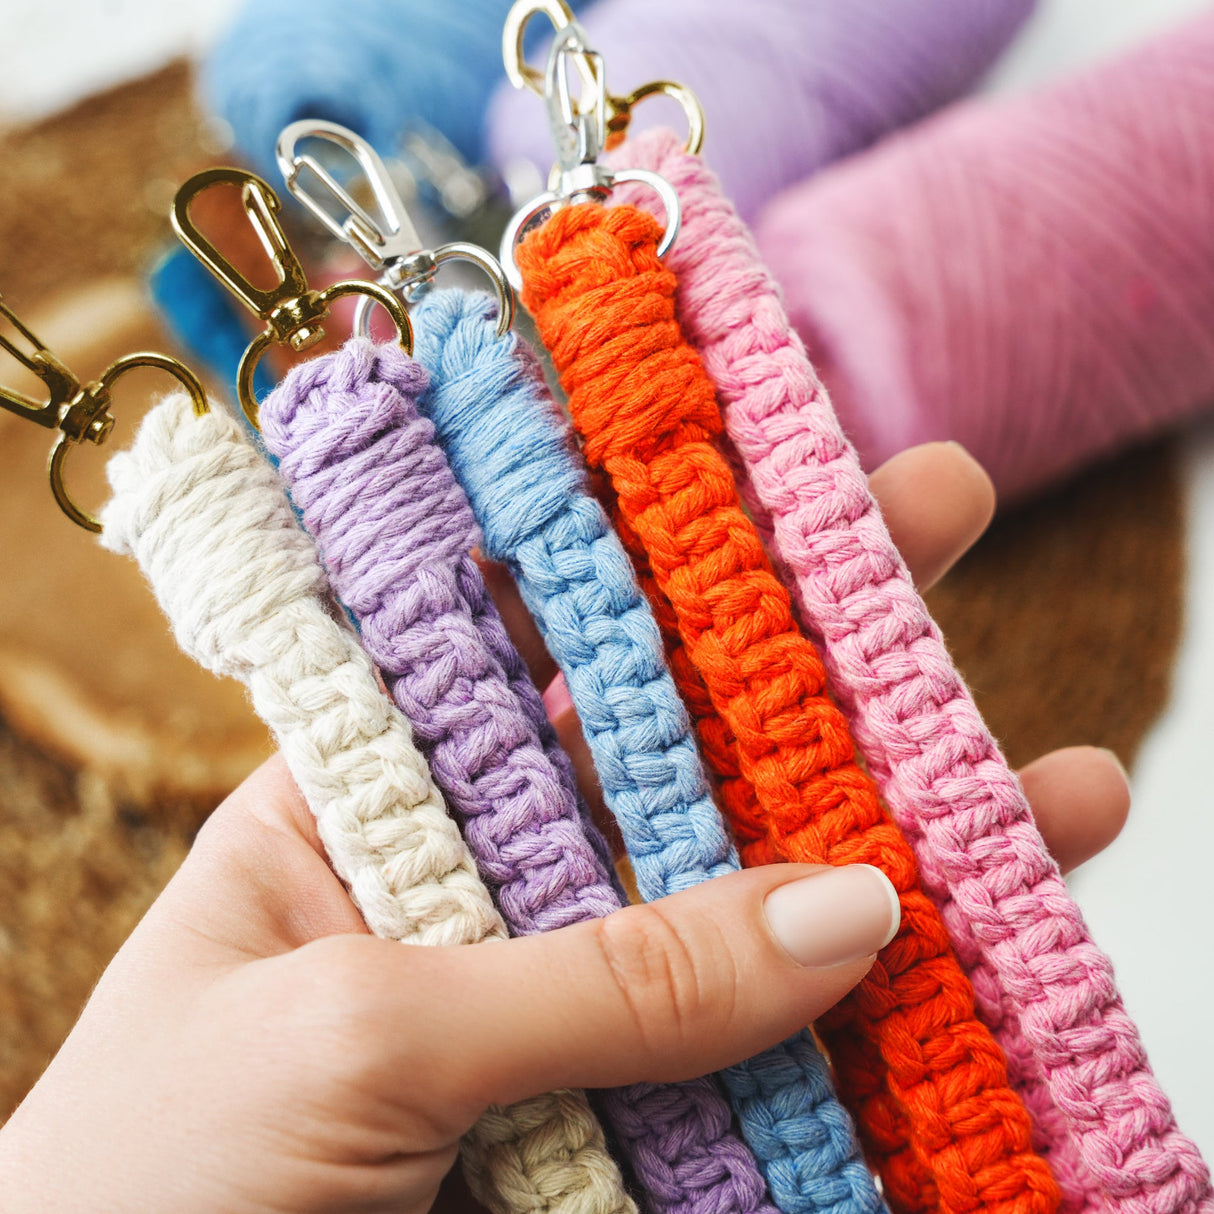 a person holding a row of crochet key chains